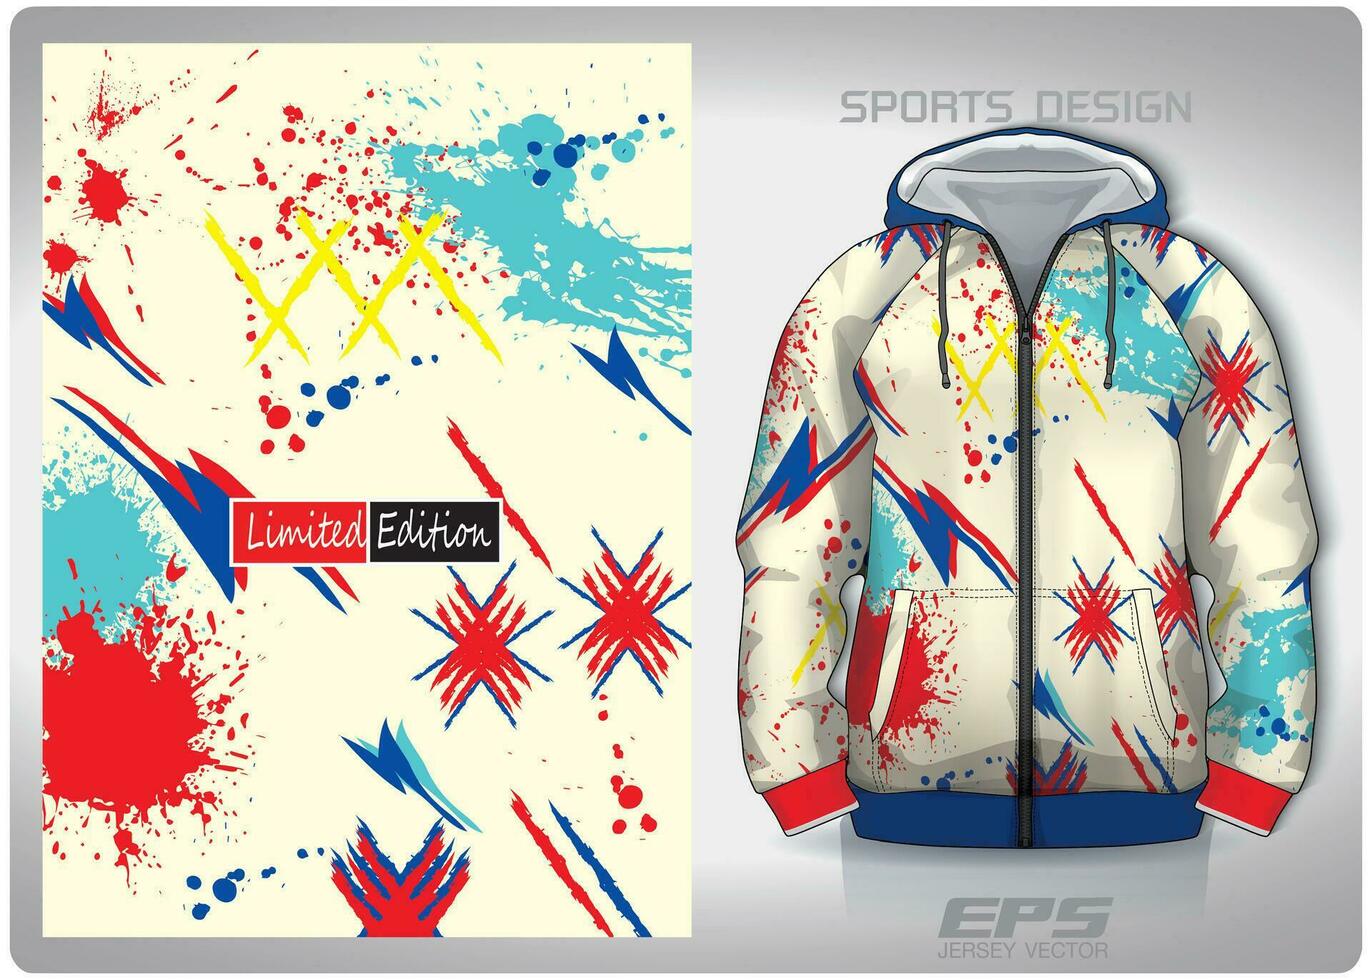 Vector sports shirt background image.colorful salad pattern design, illustration, textile background for sports long sleeve hoodie, jersey hoodie